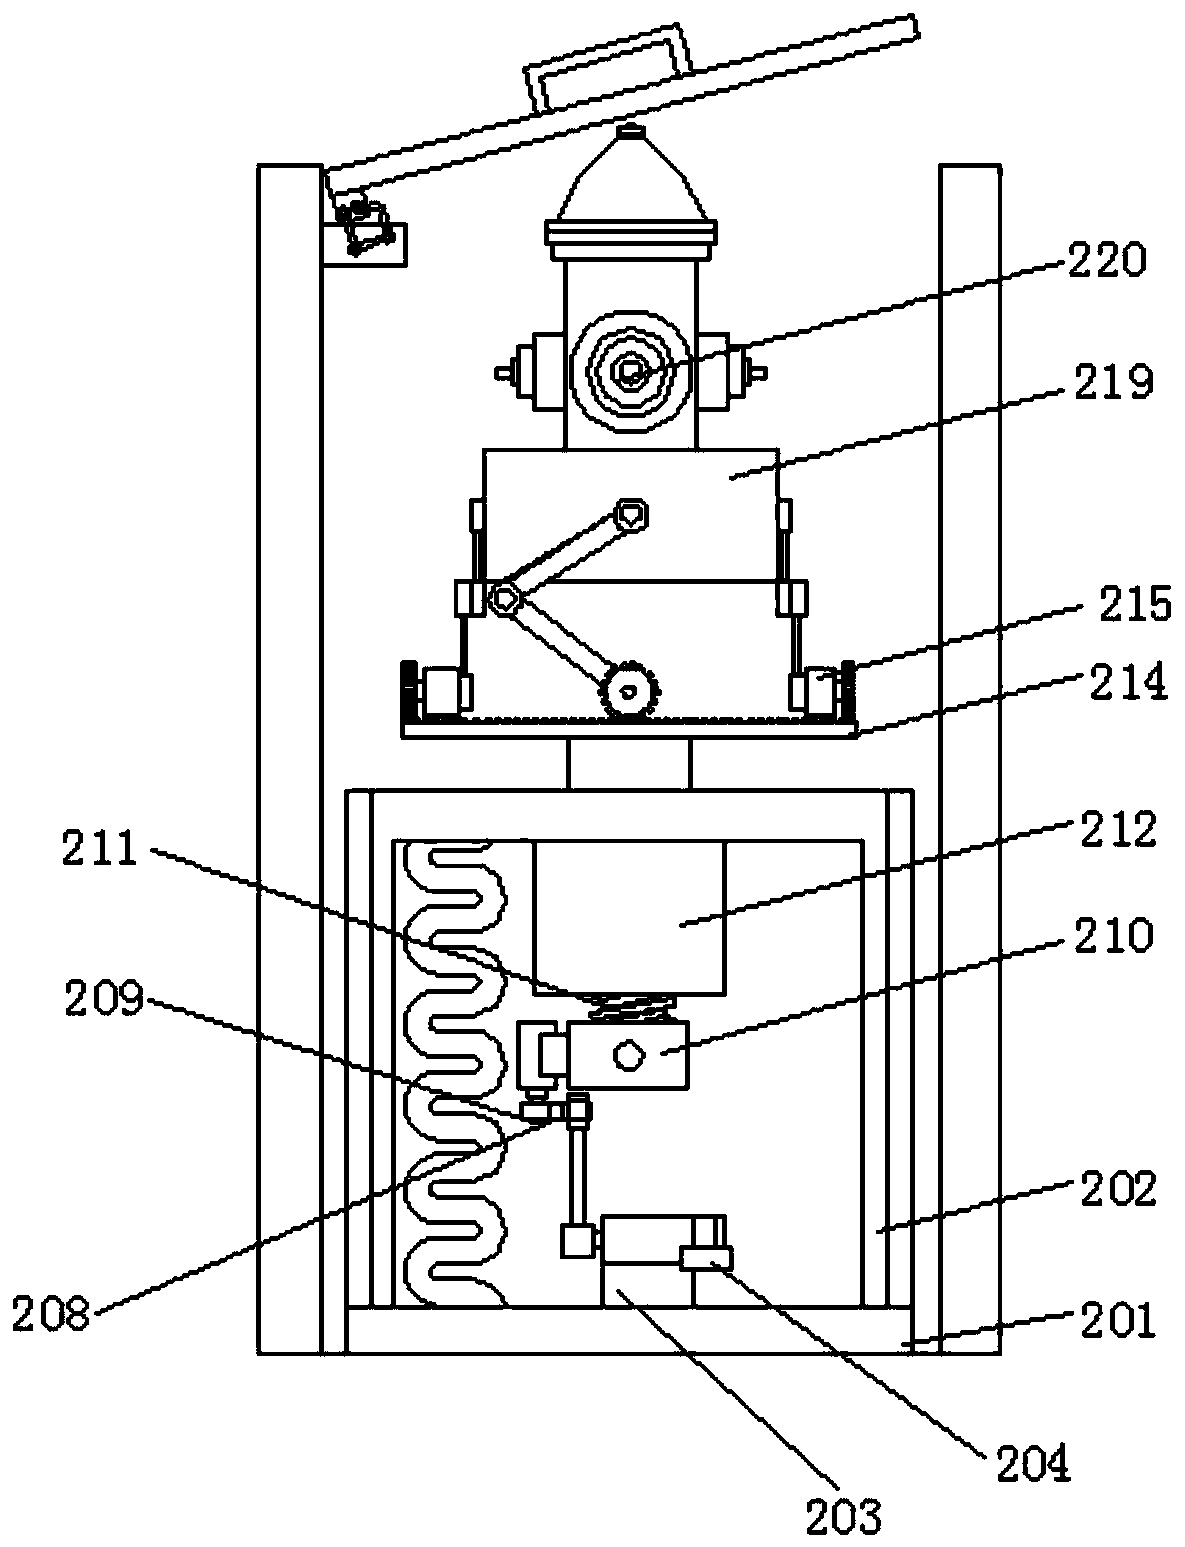 Easy-to-use fire hydrant protection device based on linkage principle of connecting rod